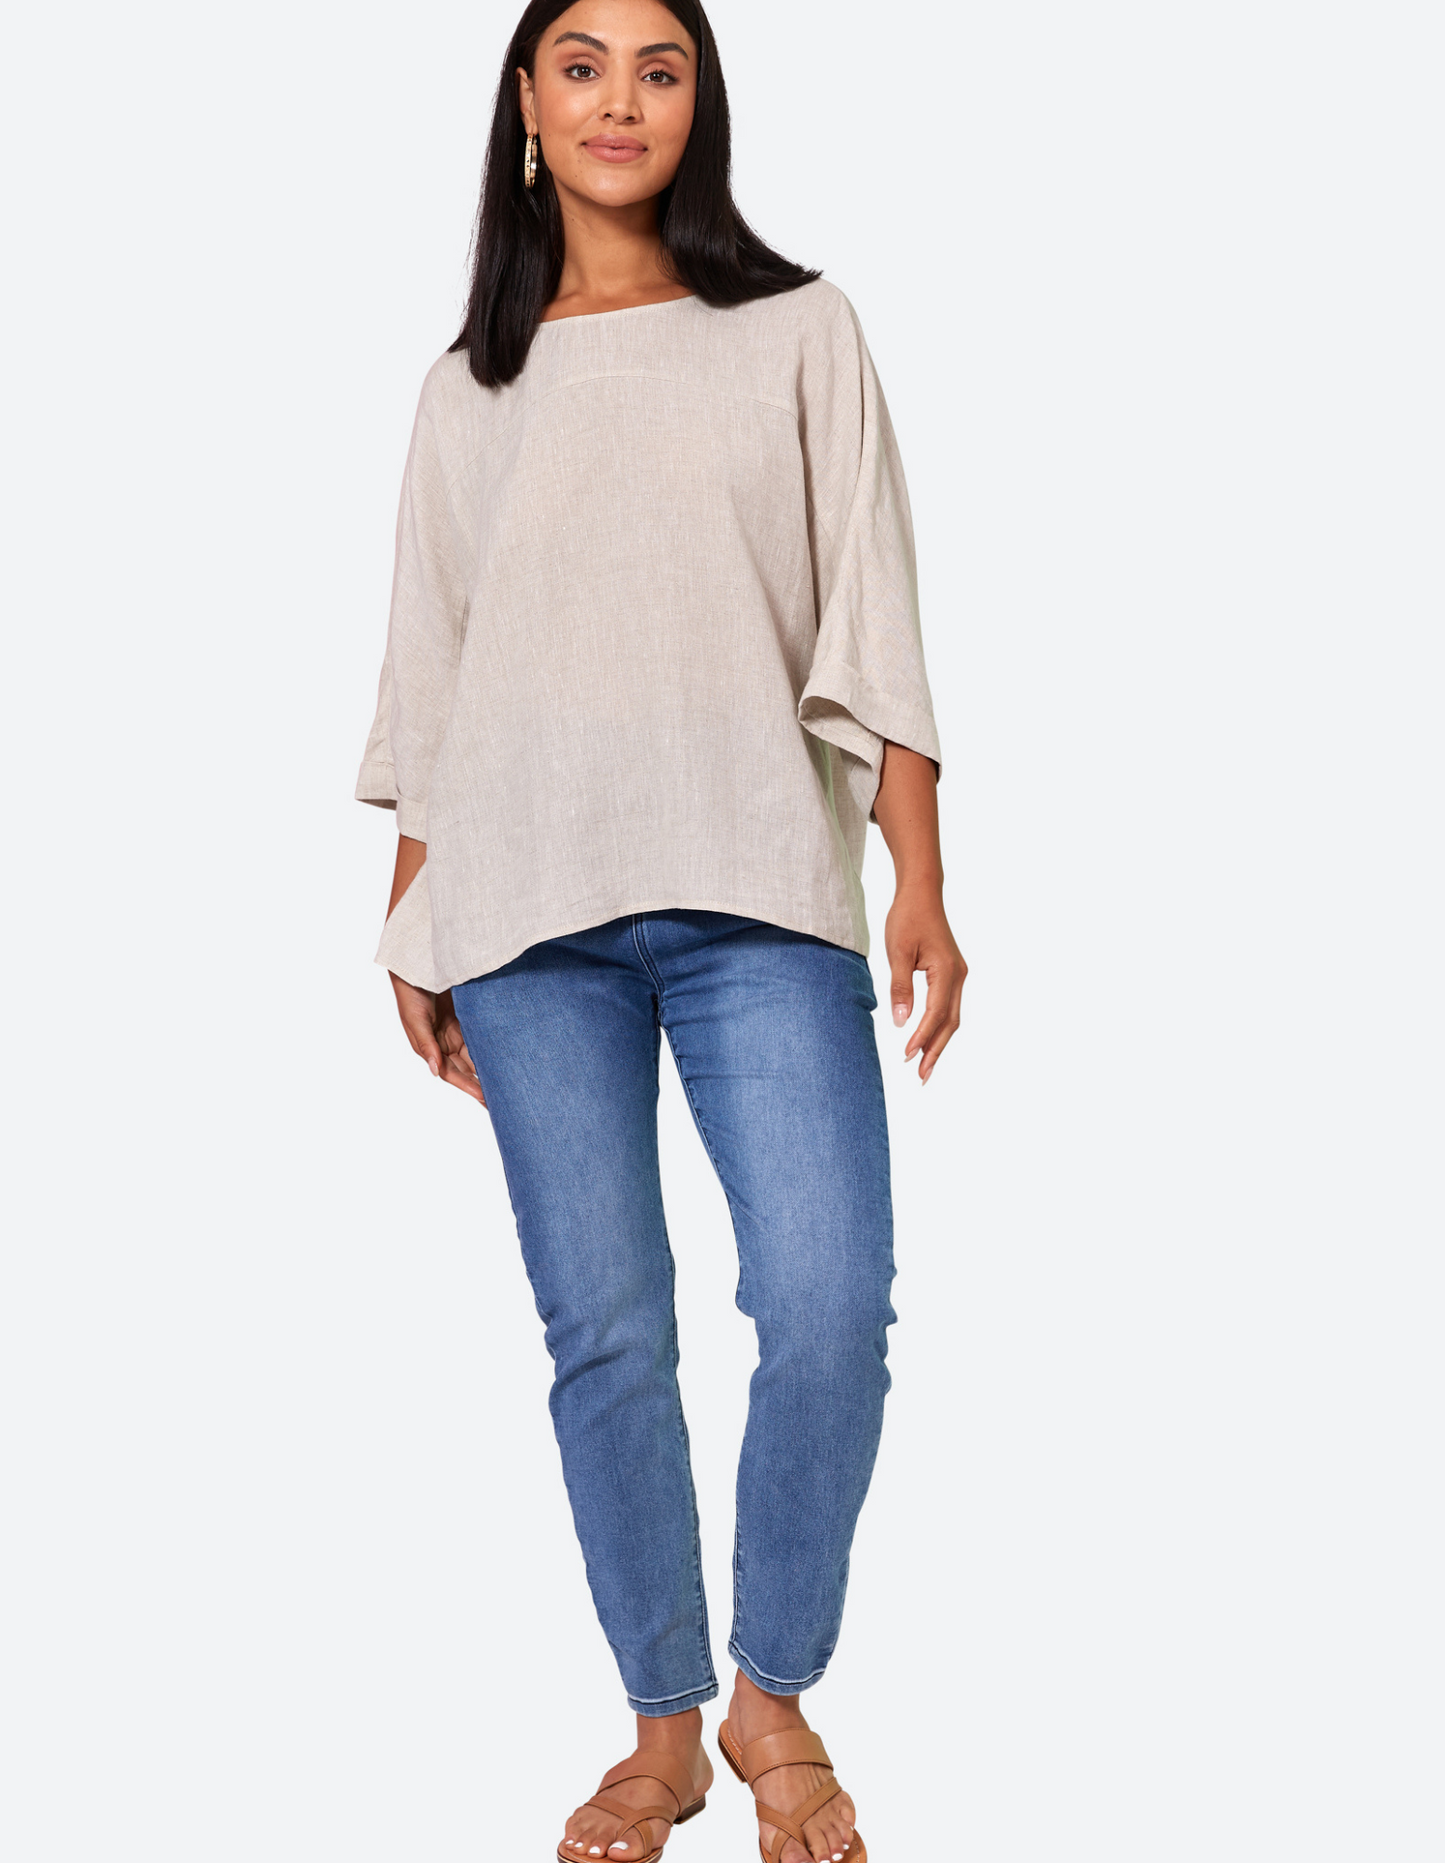 Studio Relaxed Top - Tusk - Eb&Ive